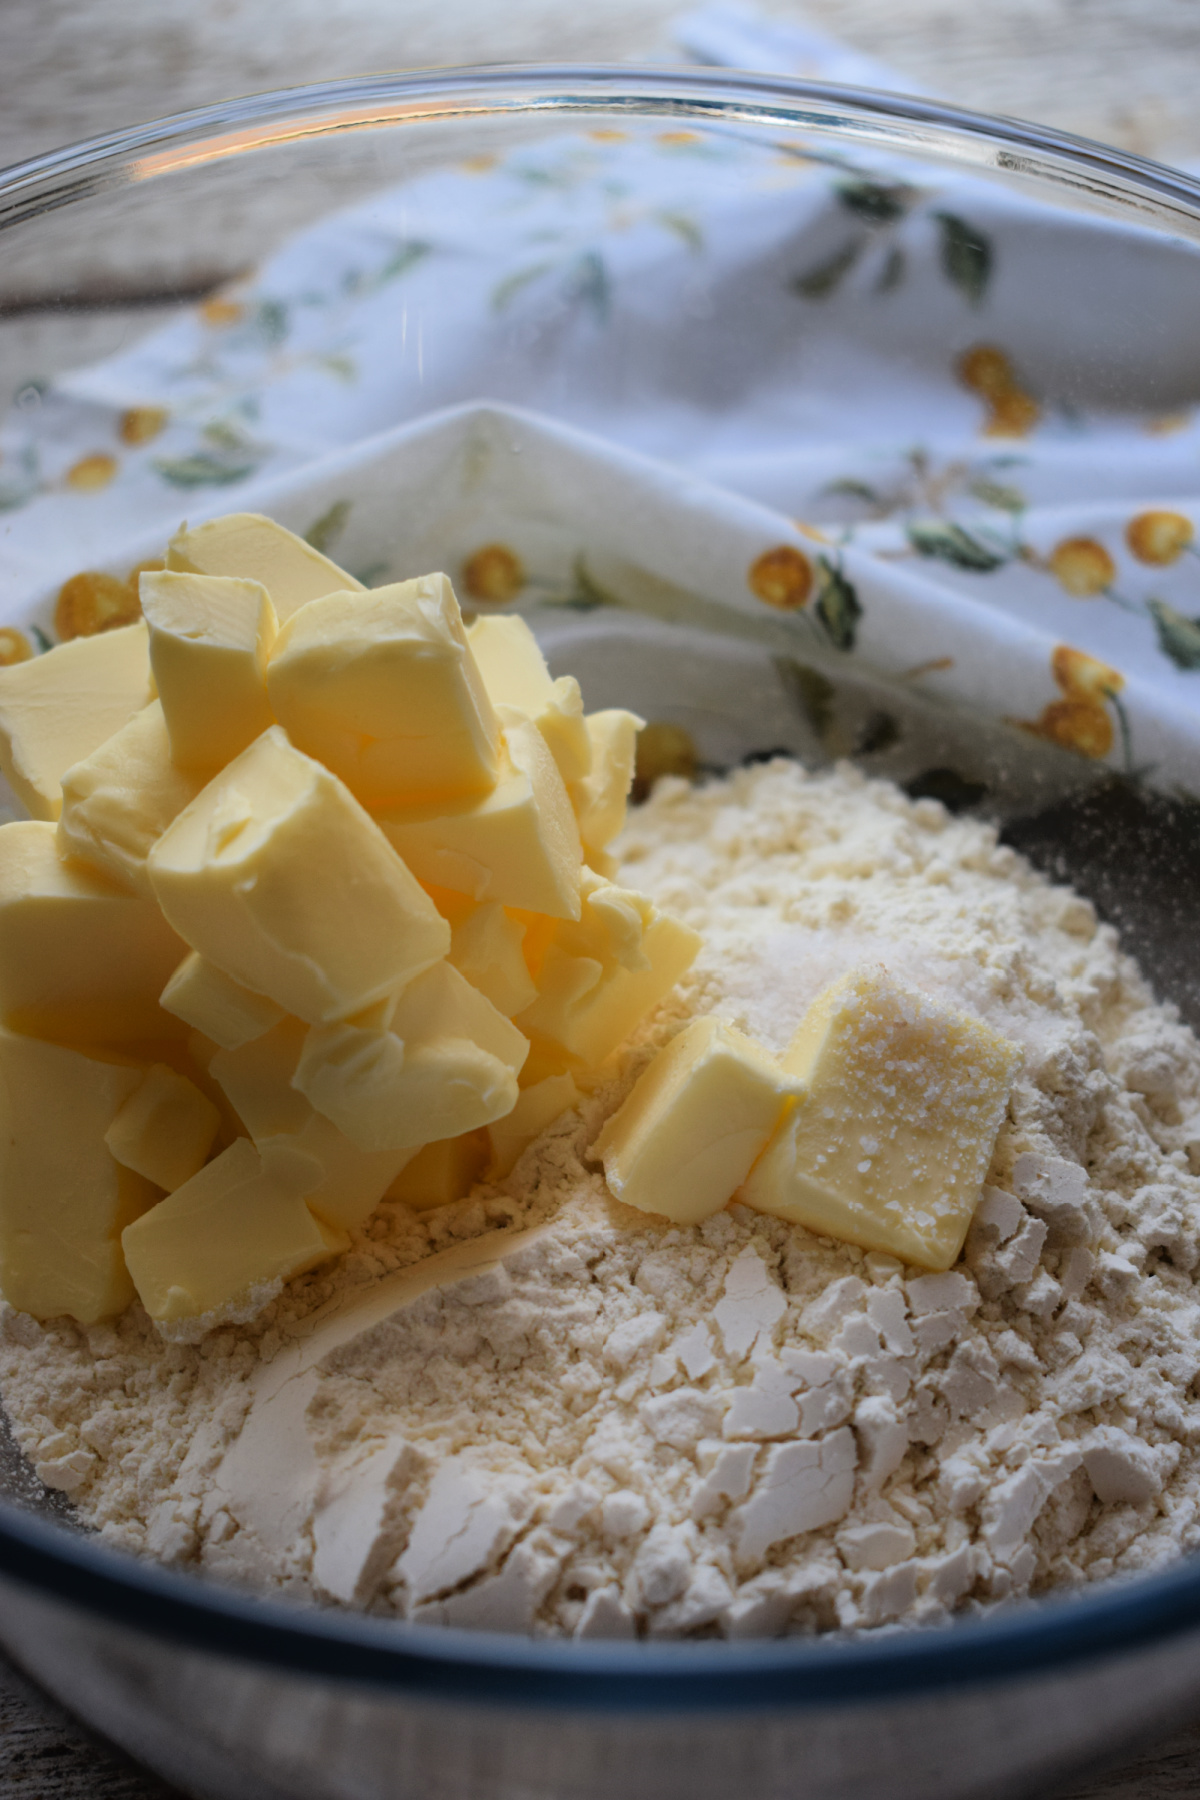 Butter and flour in a bowl to make pastry.